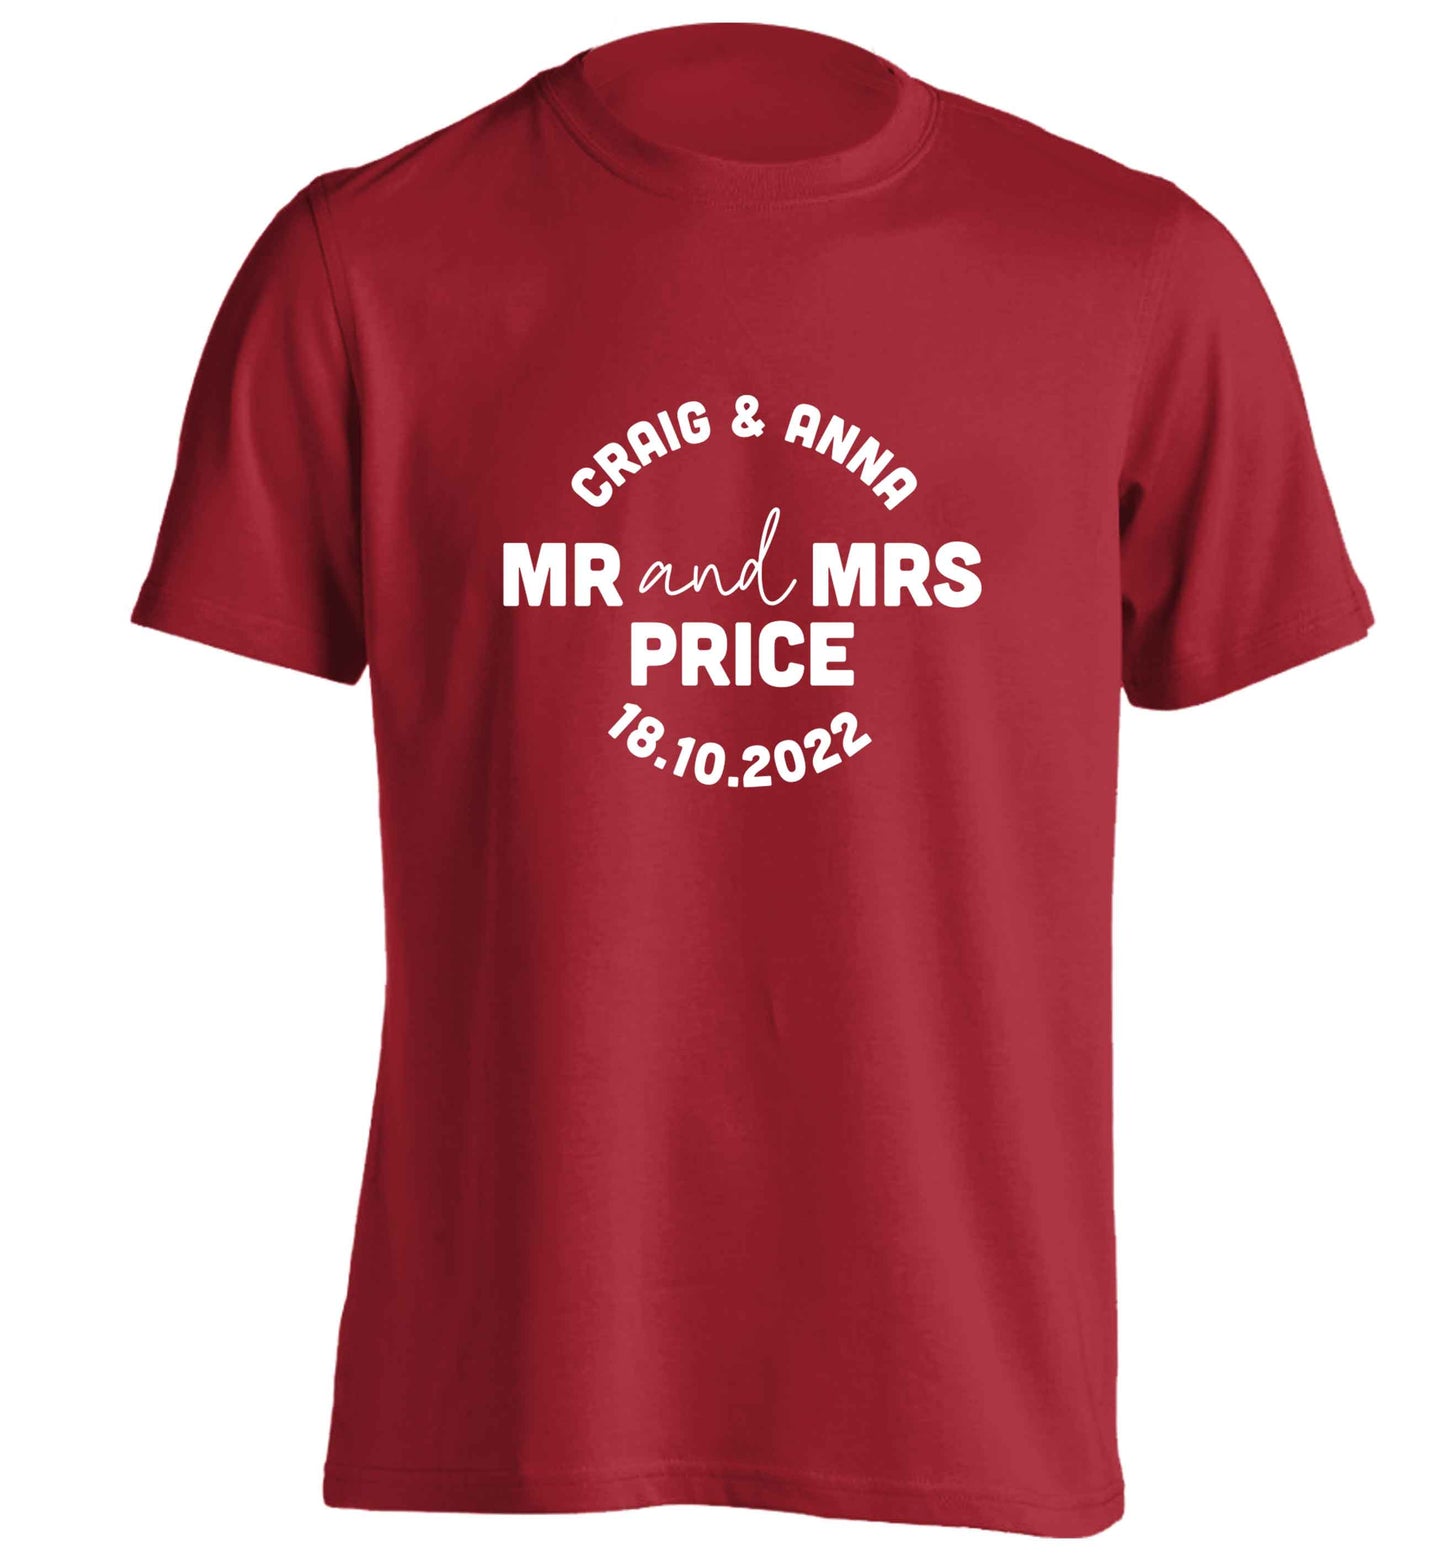 Personalised Mr and Mrs wedding and date! Ideal wedding favours! adults unisex red Tshirt 2XL